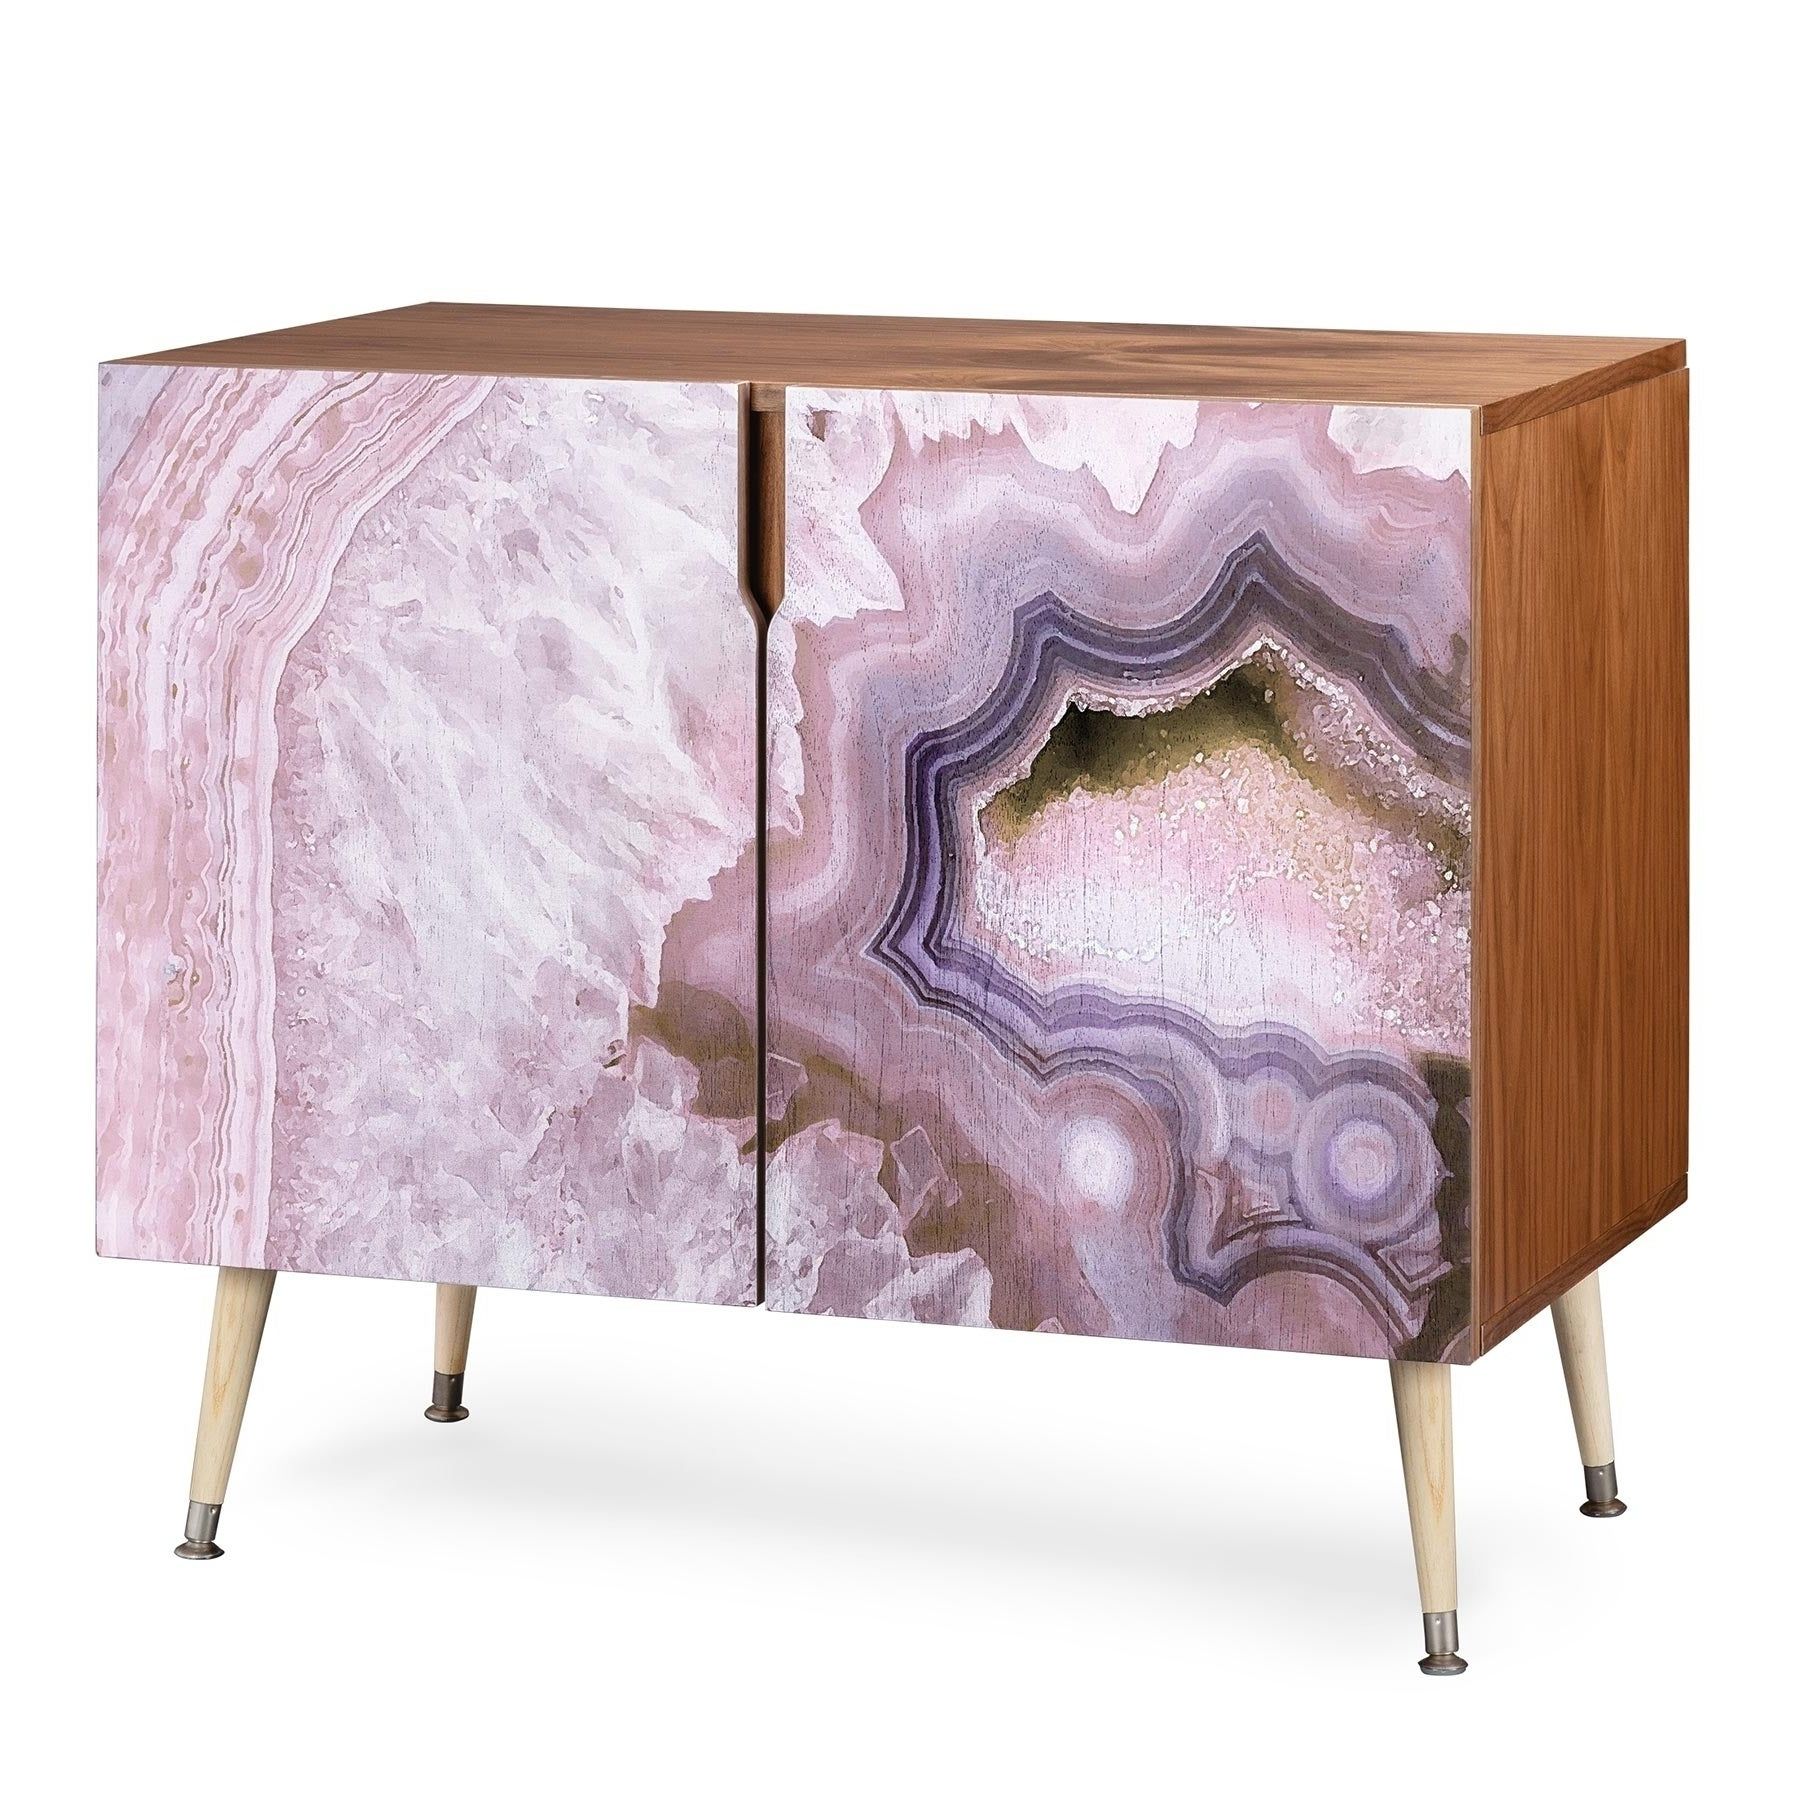 Deny Designs Pale Pink Agate Wood Credenza (3 Leg Options) With Regard To Pale Pink Bulbs Credenzas (View 12 of 20)